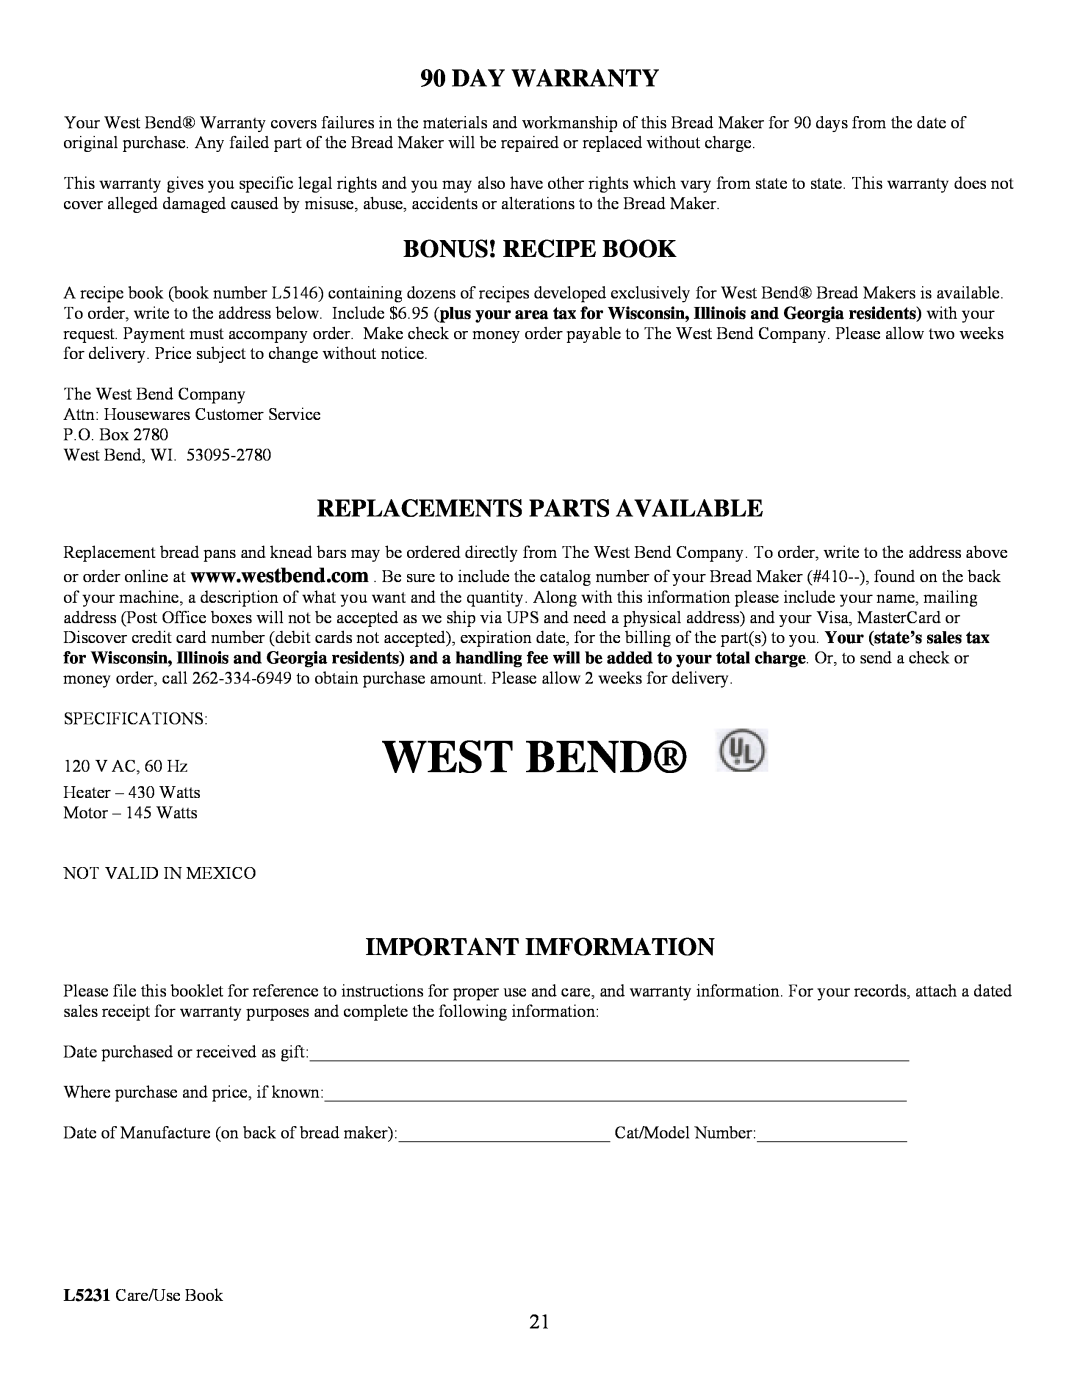 West Bend L5231 Day Warranty, Bonus! Recipe Book, Replacements Parts Available, Important Imformation, West Bend 